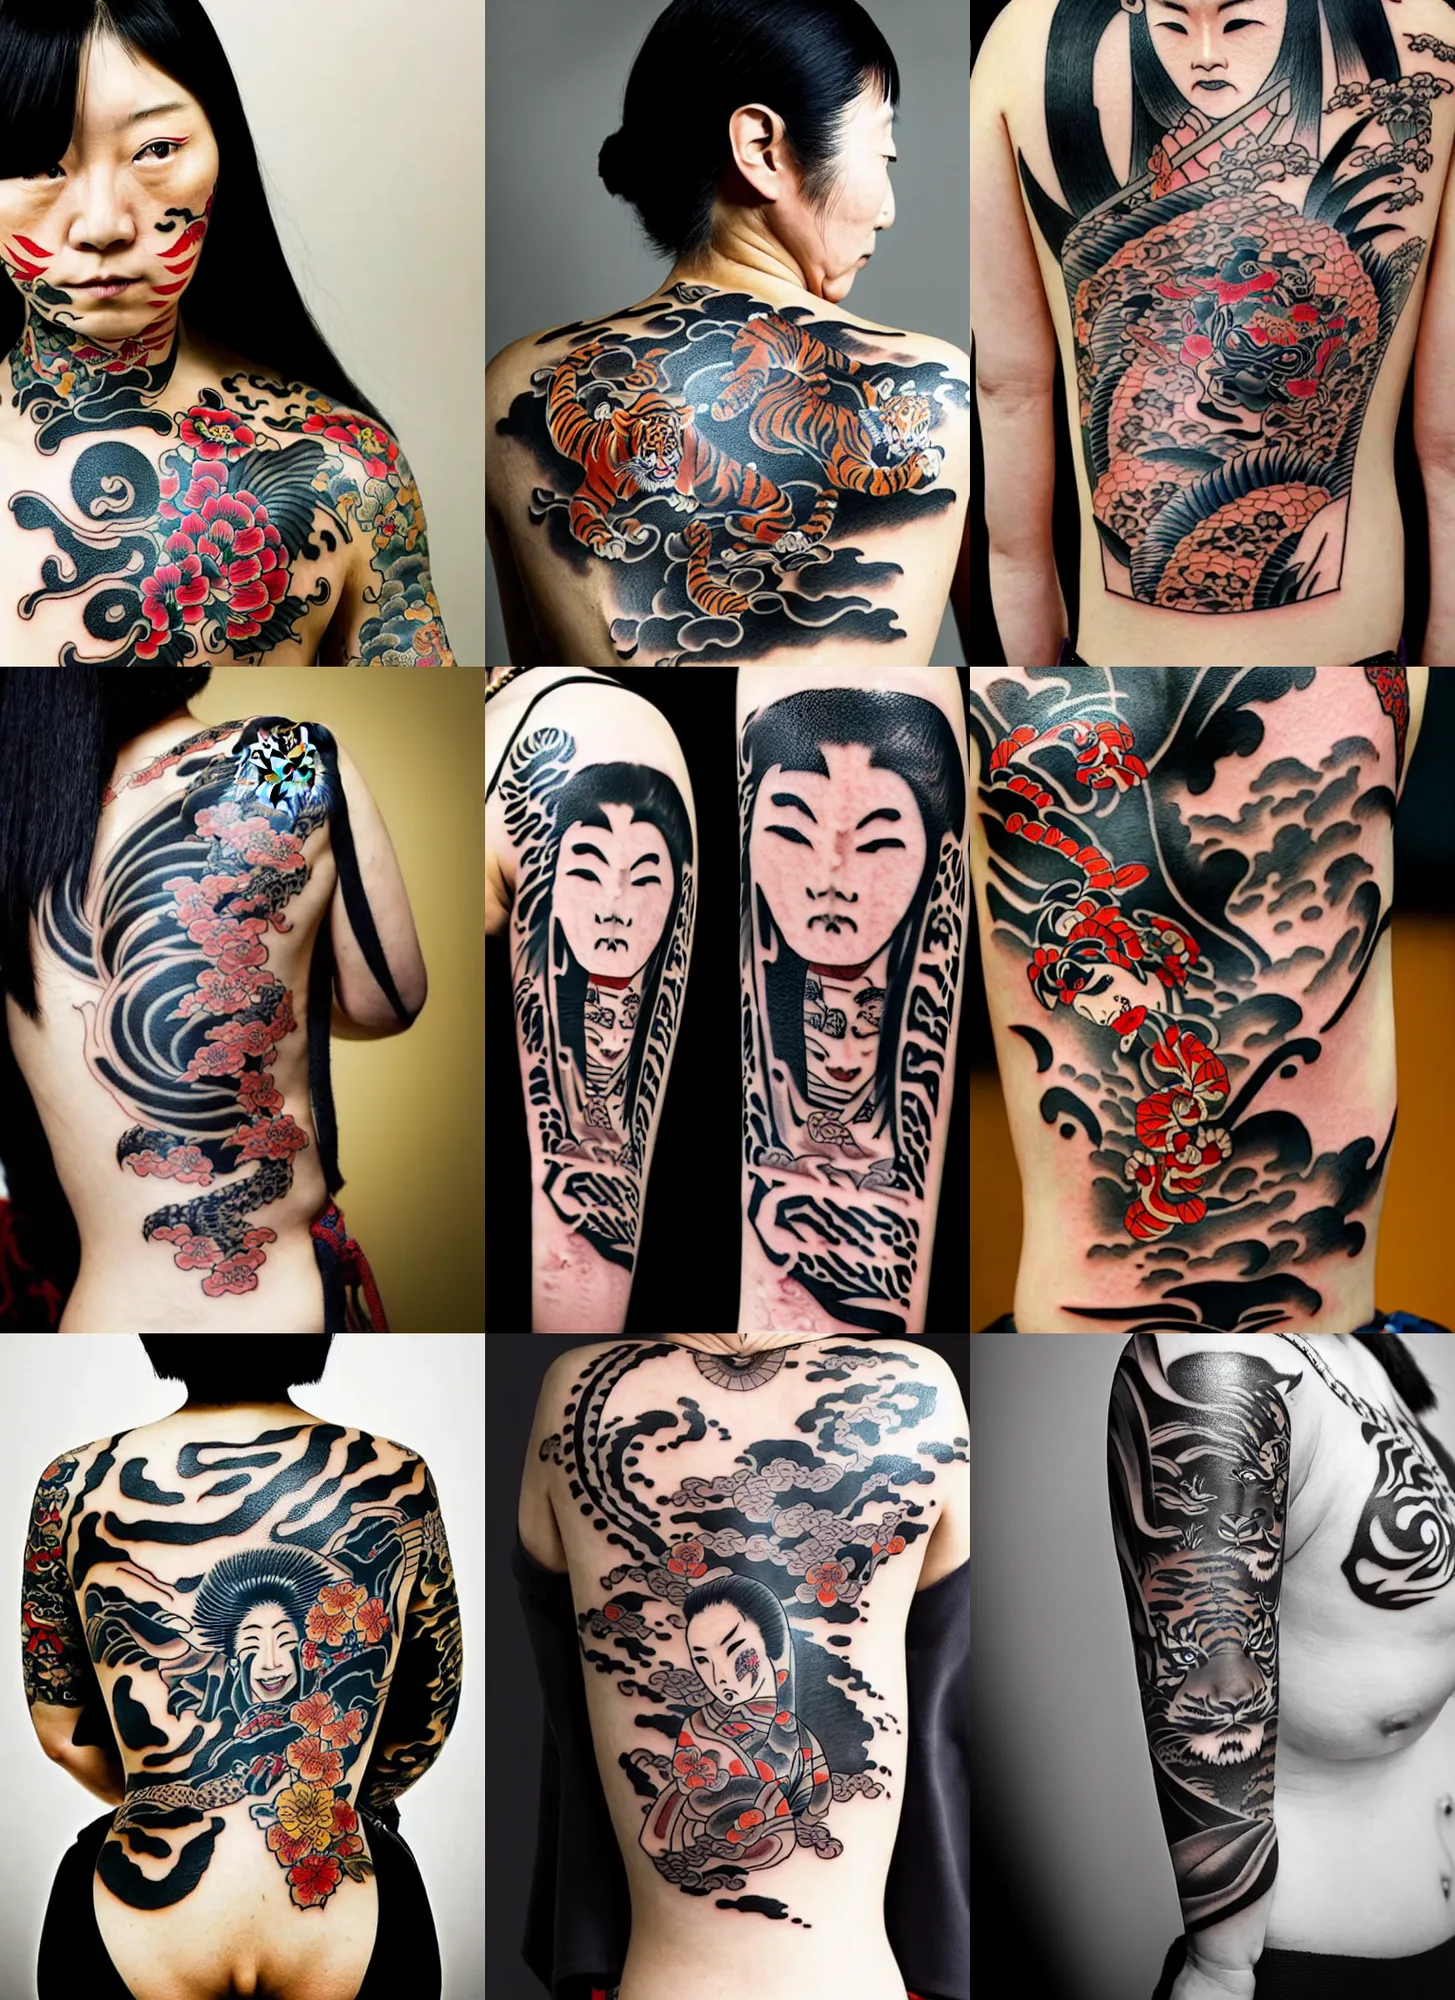 Cool Camera Tattoo Designs for Arms | Tons of free tattoo id… | Flickr